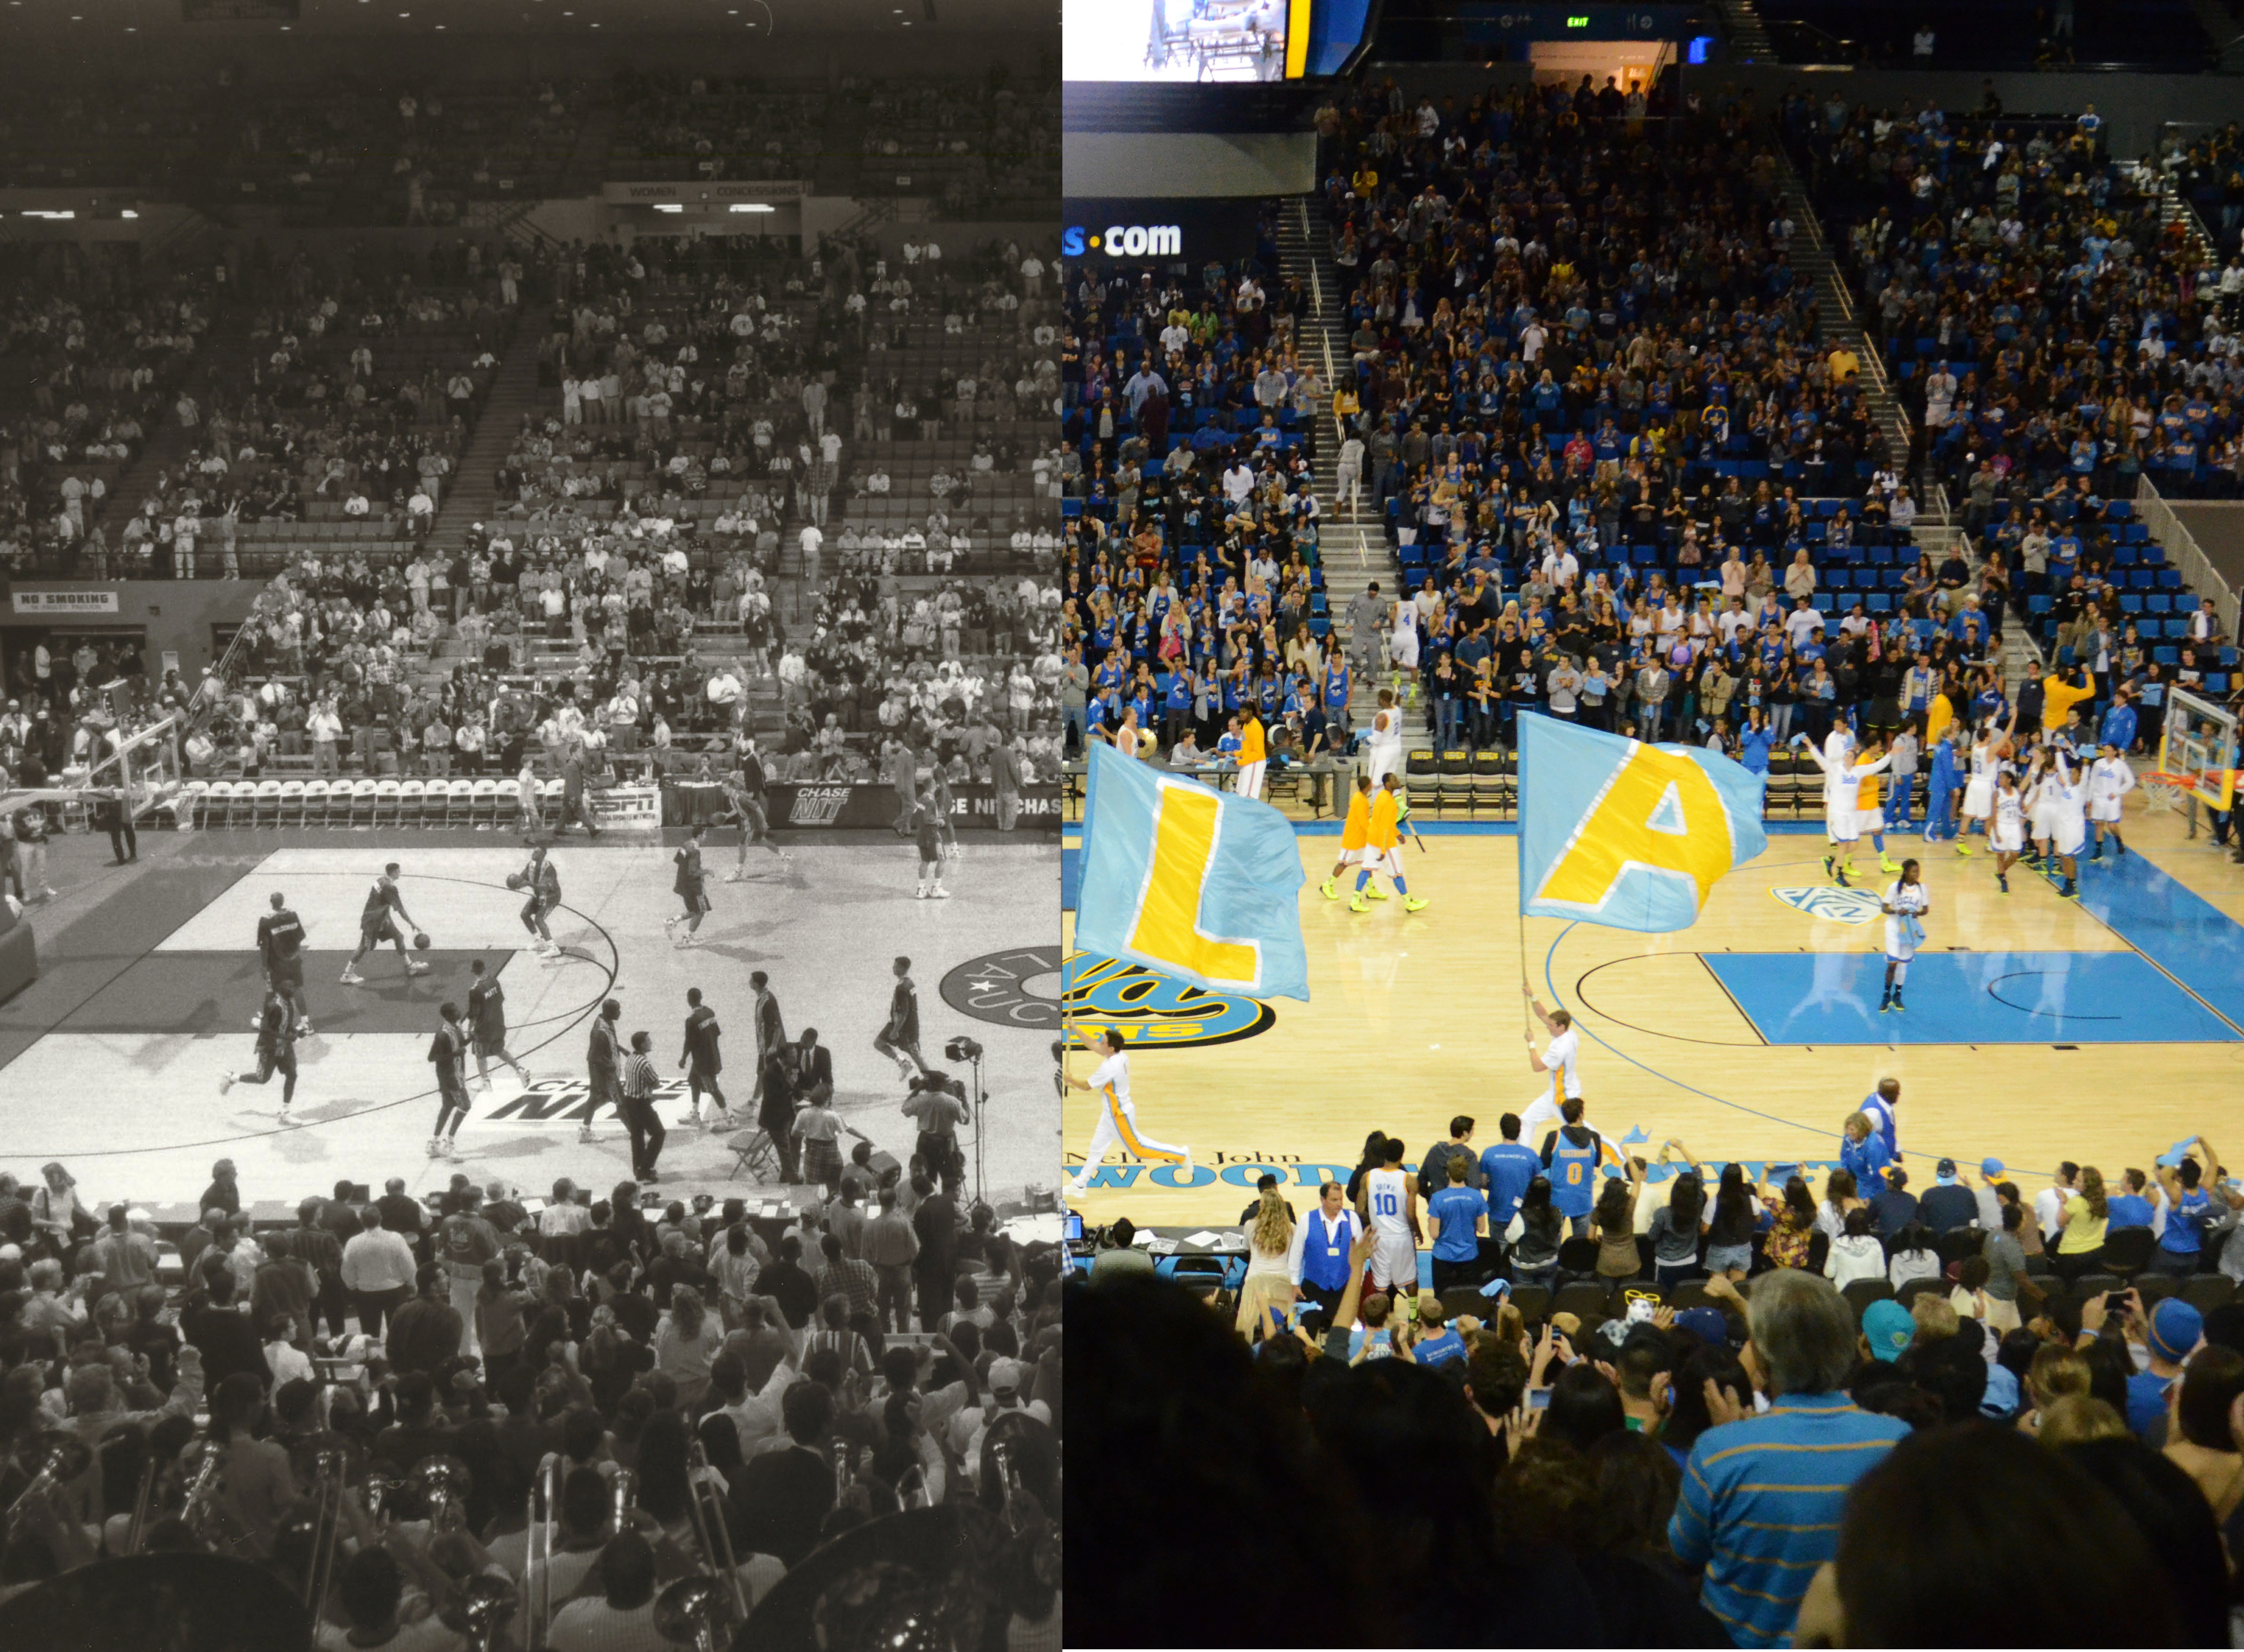 Pauley Pavilion on the UCLA campus, home of Bruins basketball